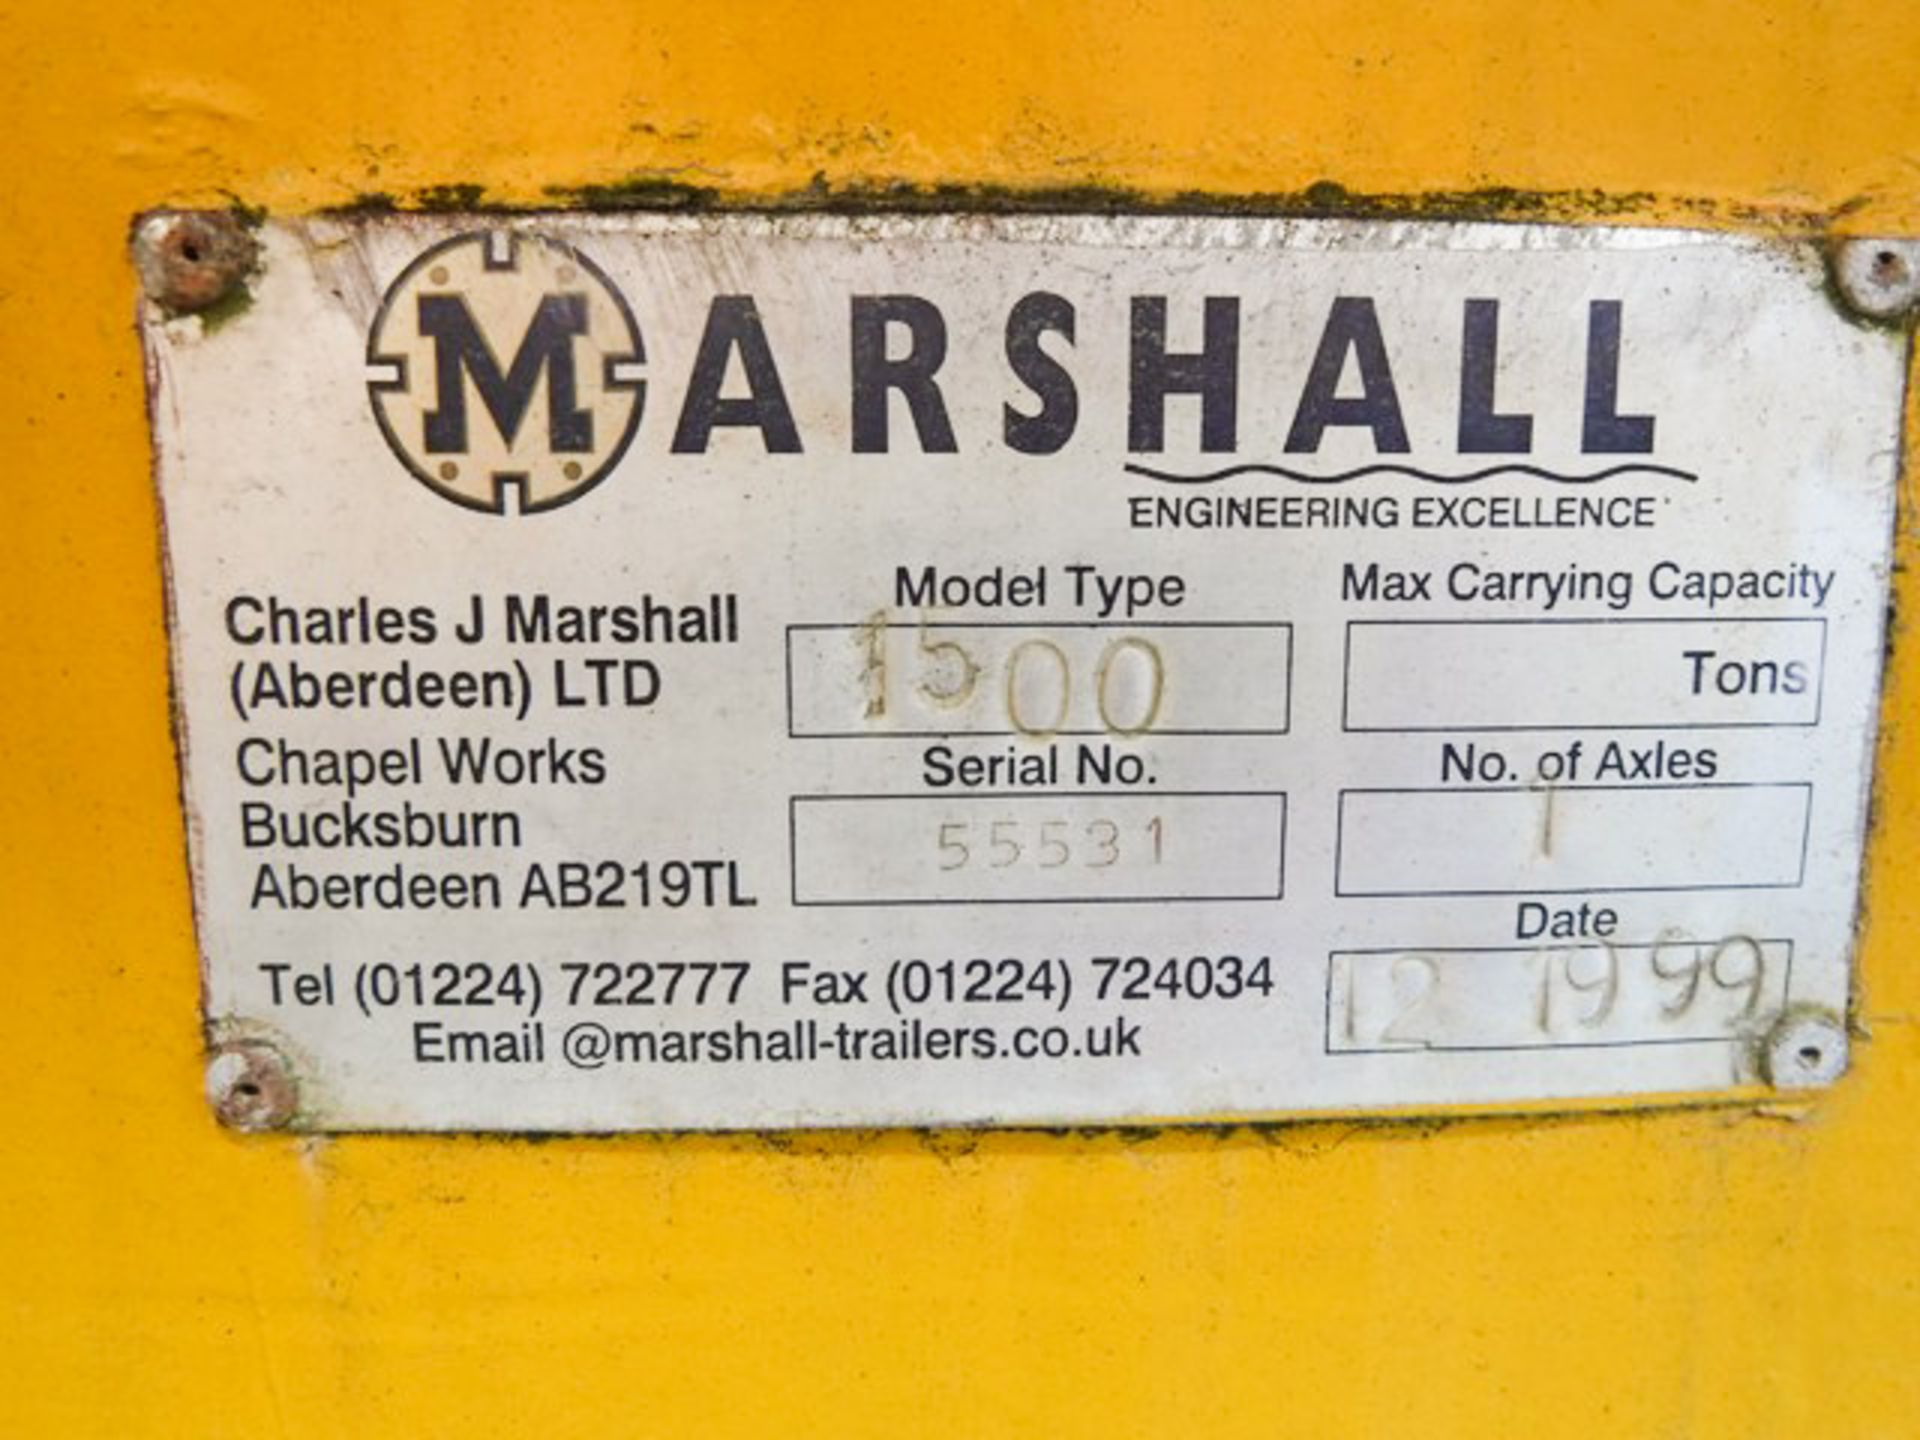 1999 MARSHALL VACUUM TANK 1500 - s/n 55531. New brakes, tyres & pump fitted early 2017. - Image 8 of 8